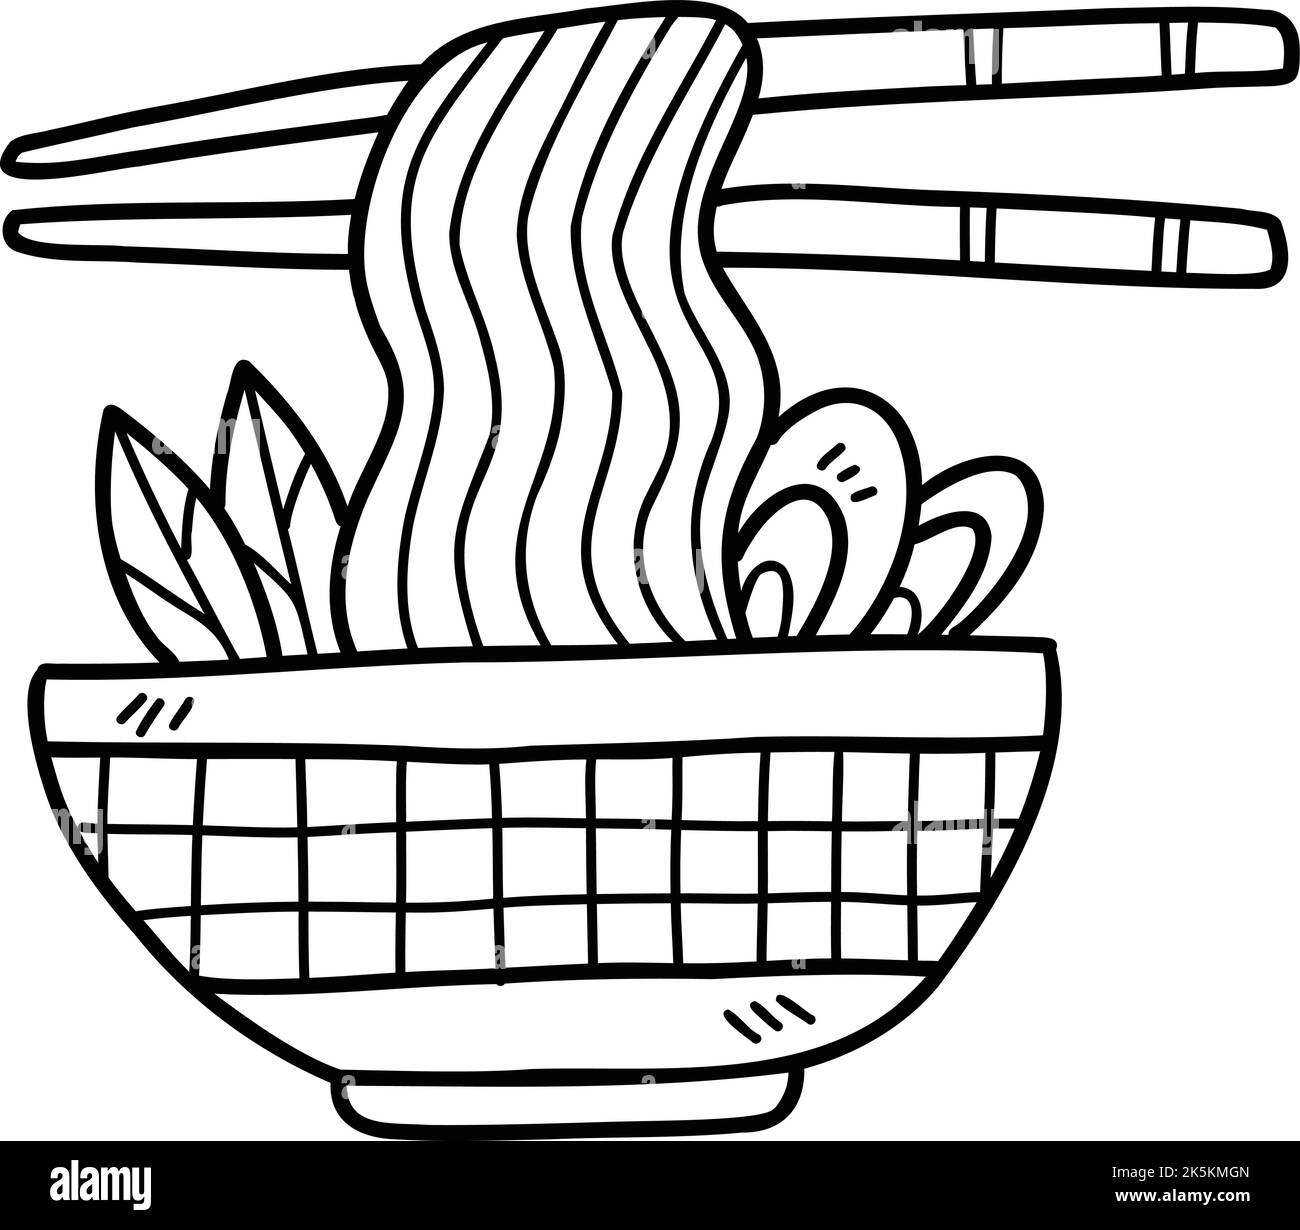 Hand Drawn delicious noodles and chopsticks illustration isolated on background Stock Vector